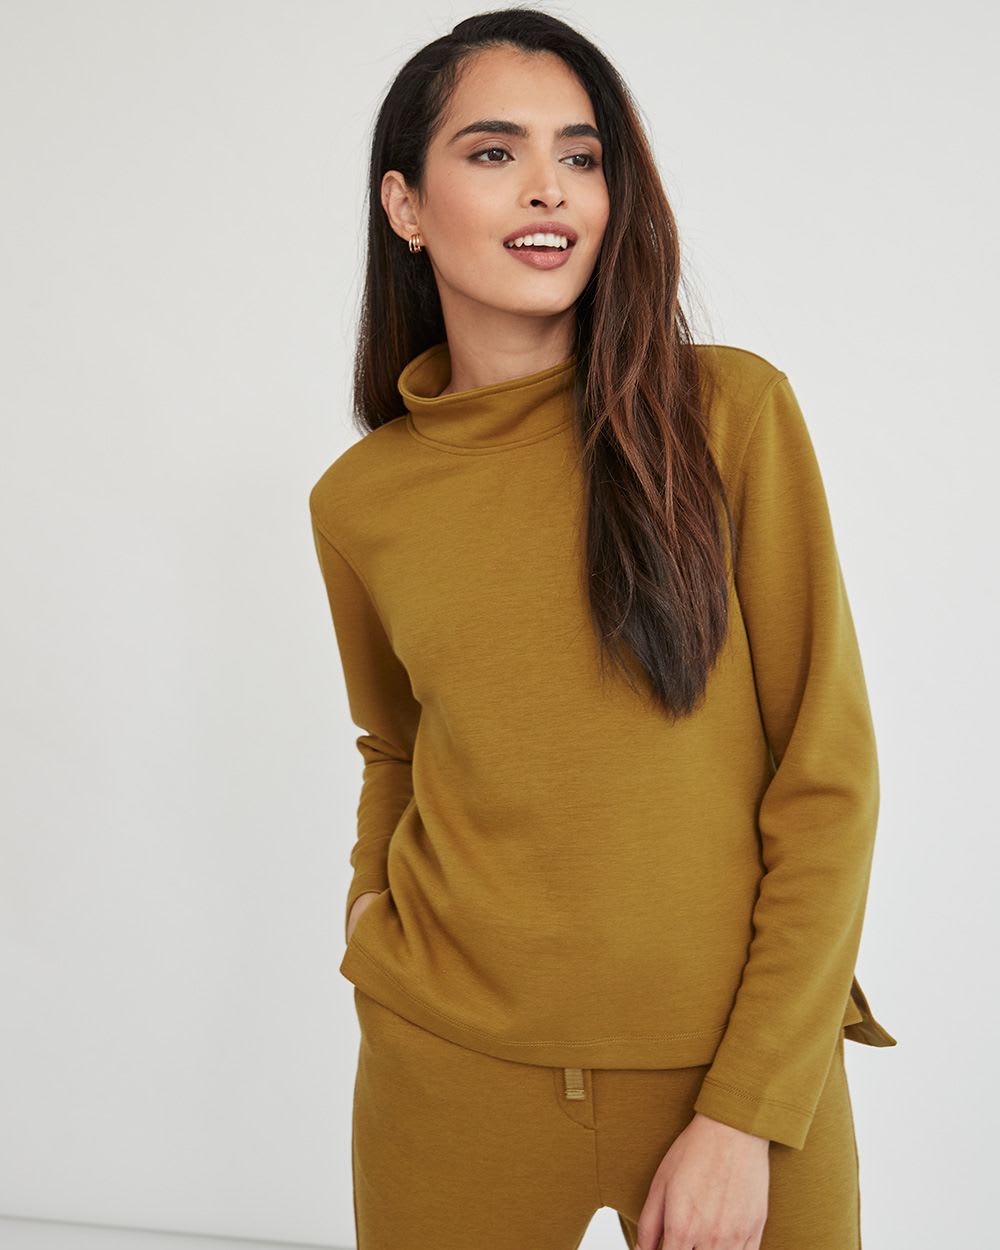 High-Neck Long Sleeve Scuba Top with Side Slits